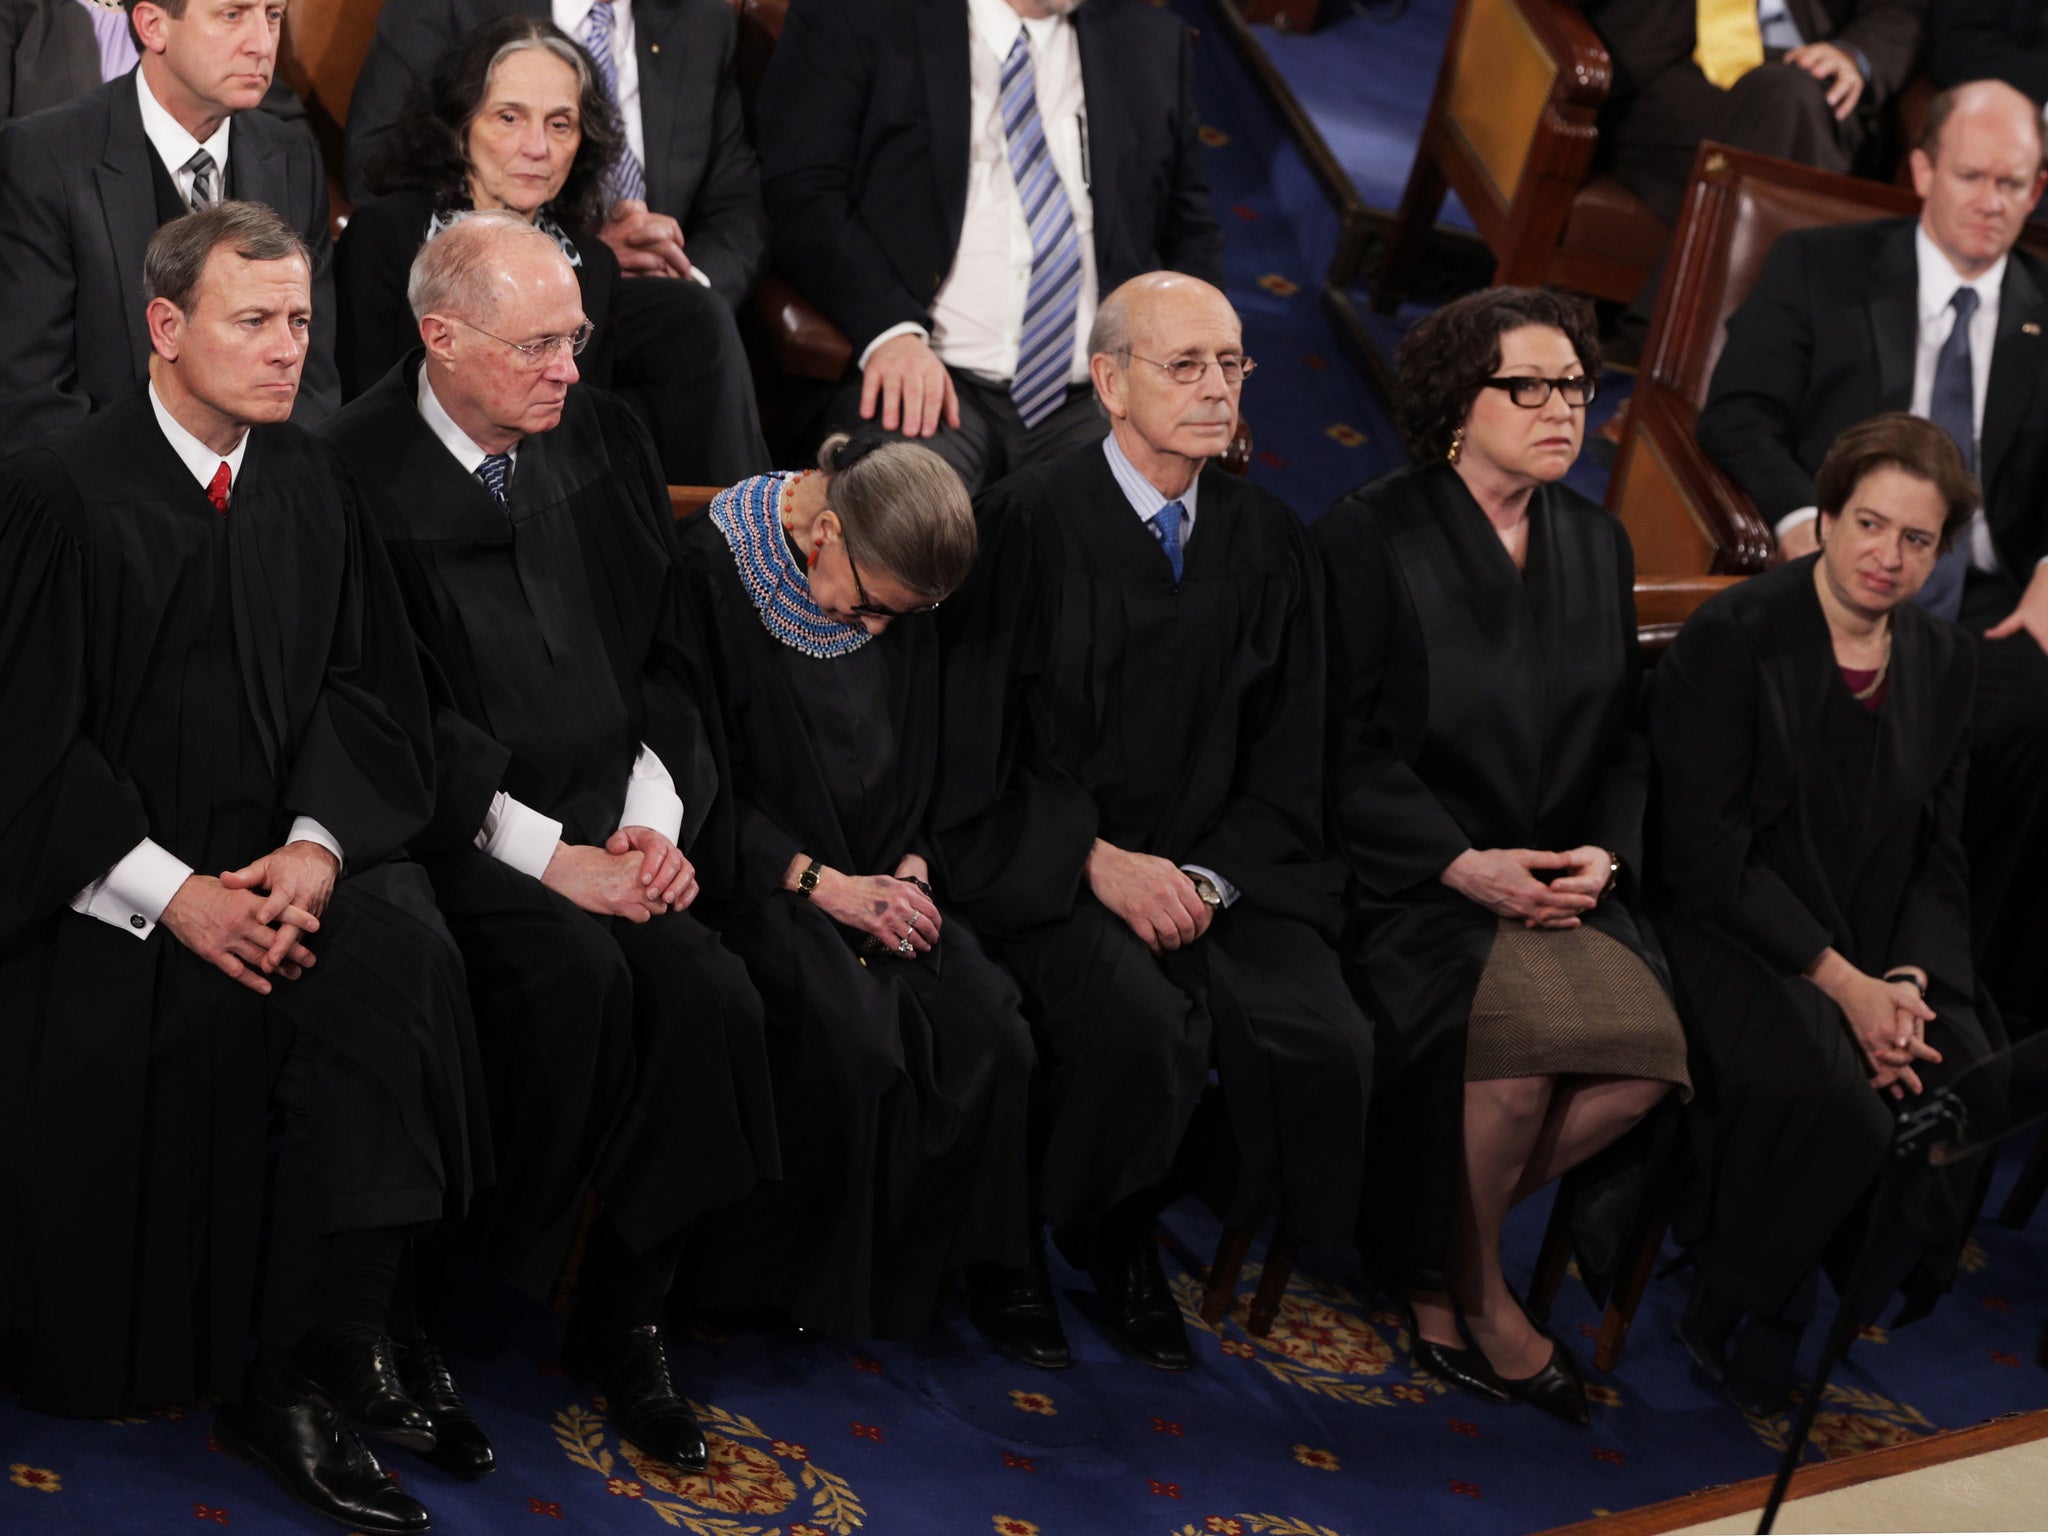 The supreme court judge admitted drinking too much before falling asleep